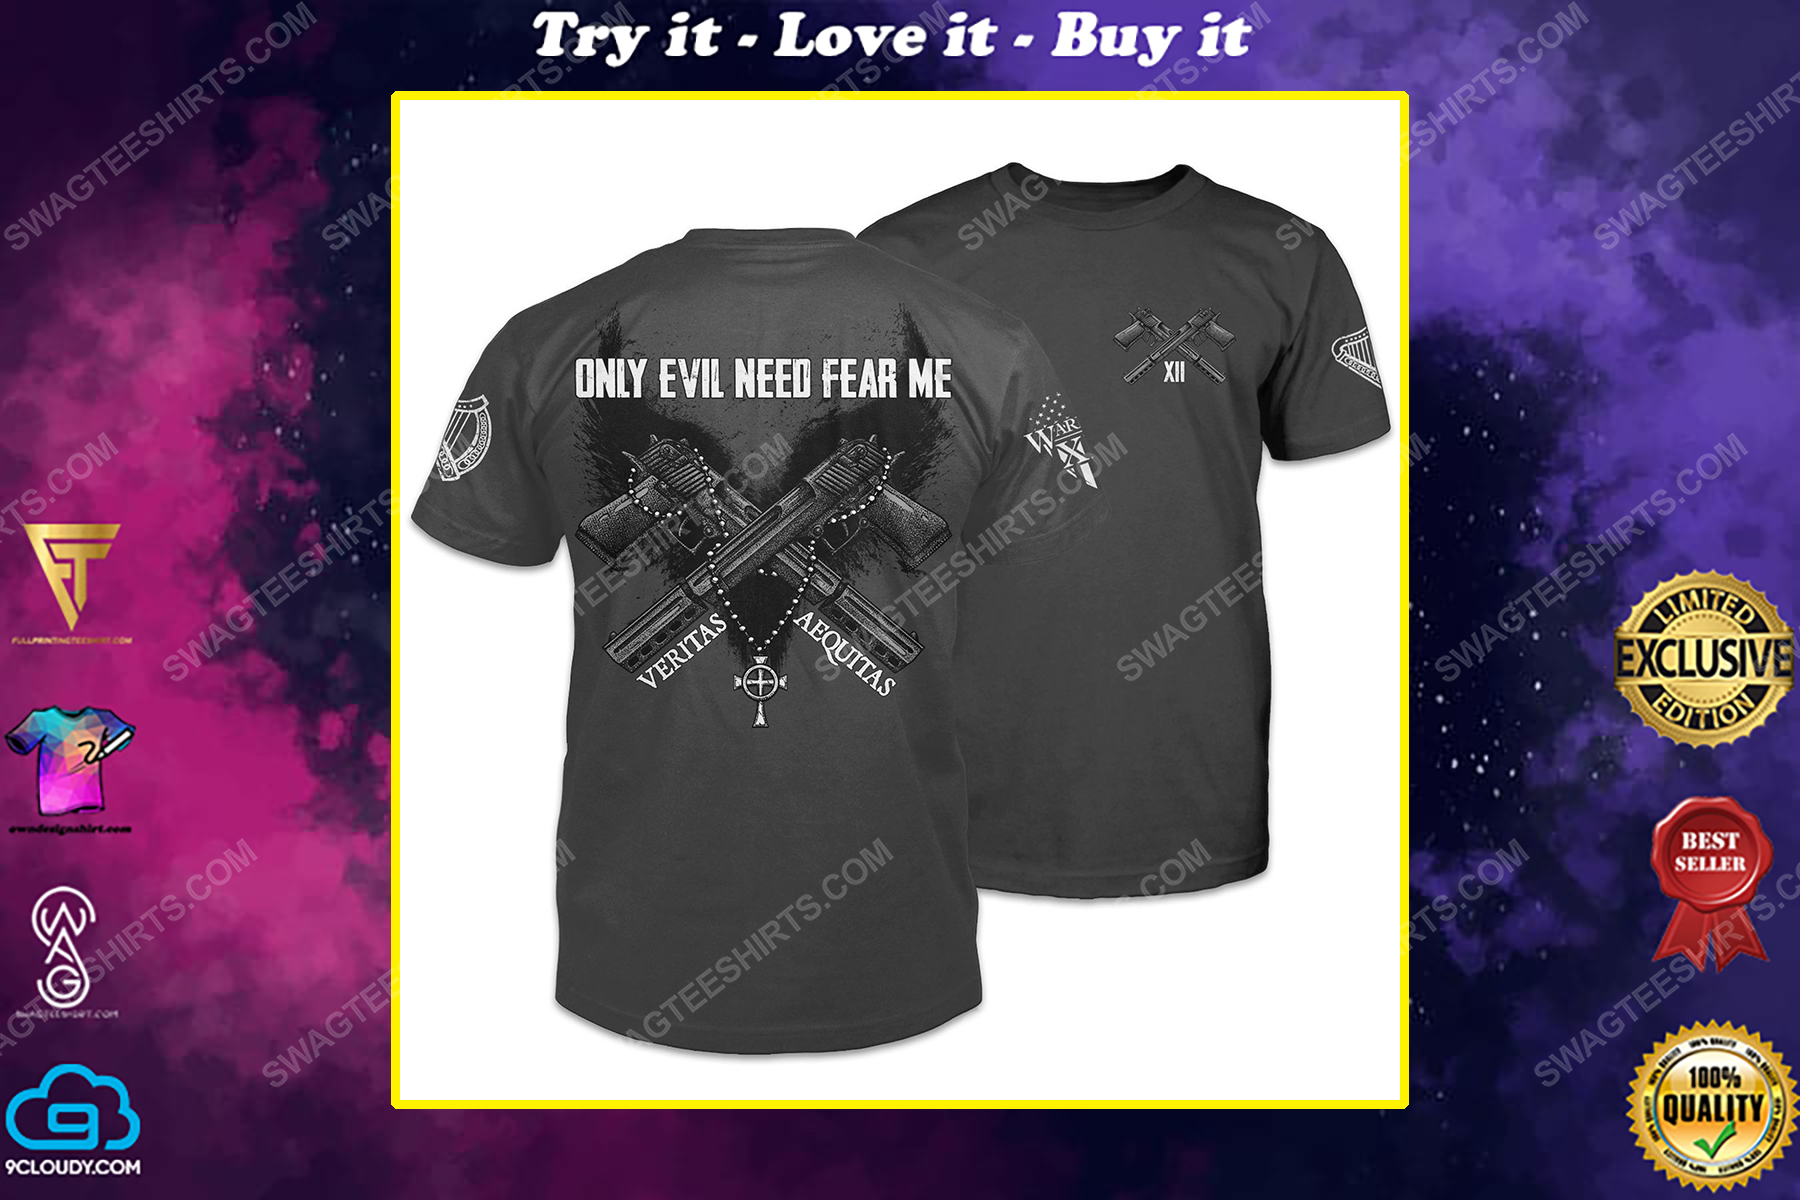 Only evil need fear me veritas aequitas shirt